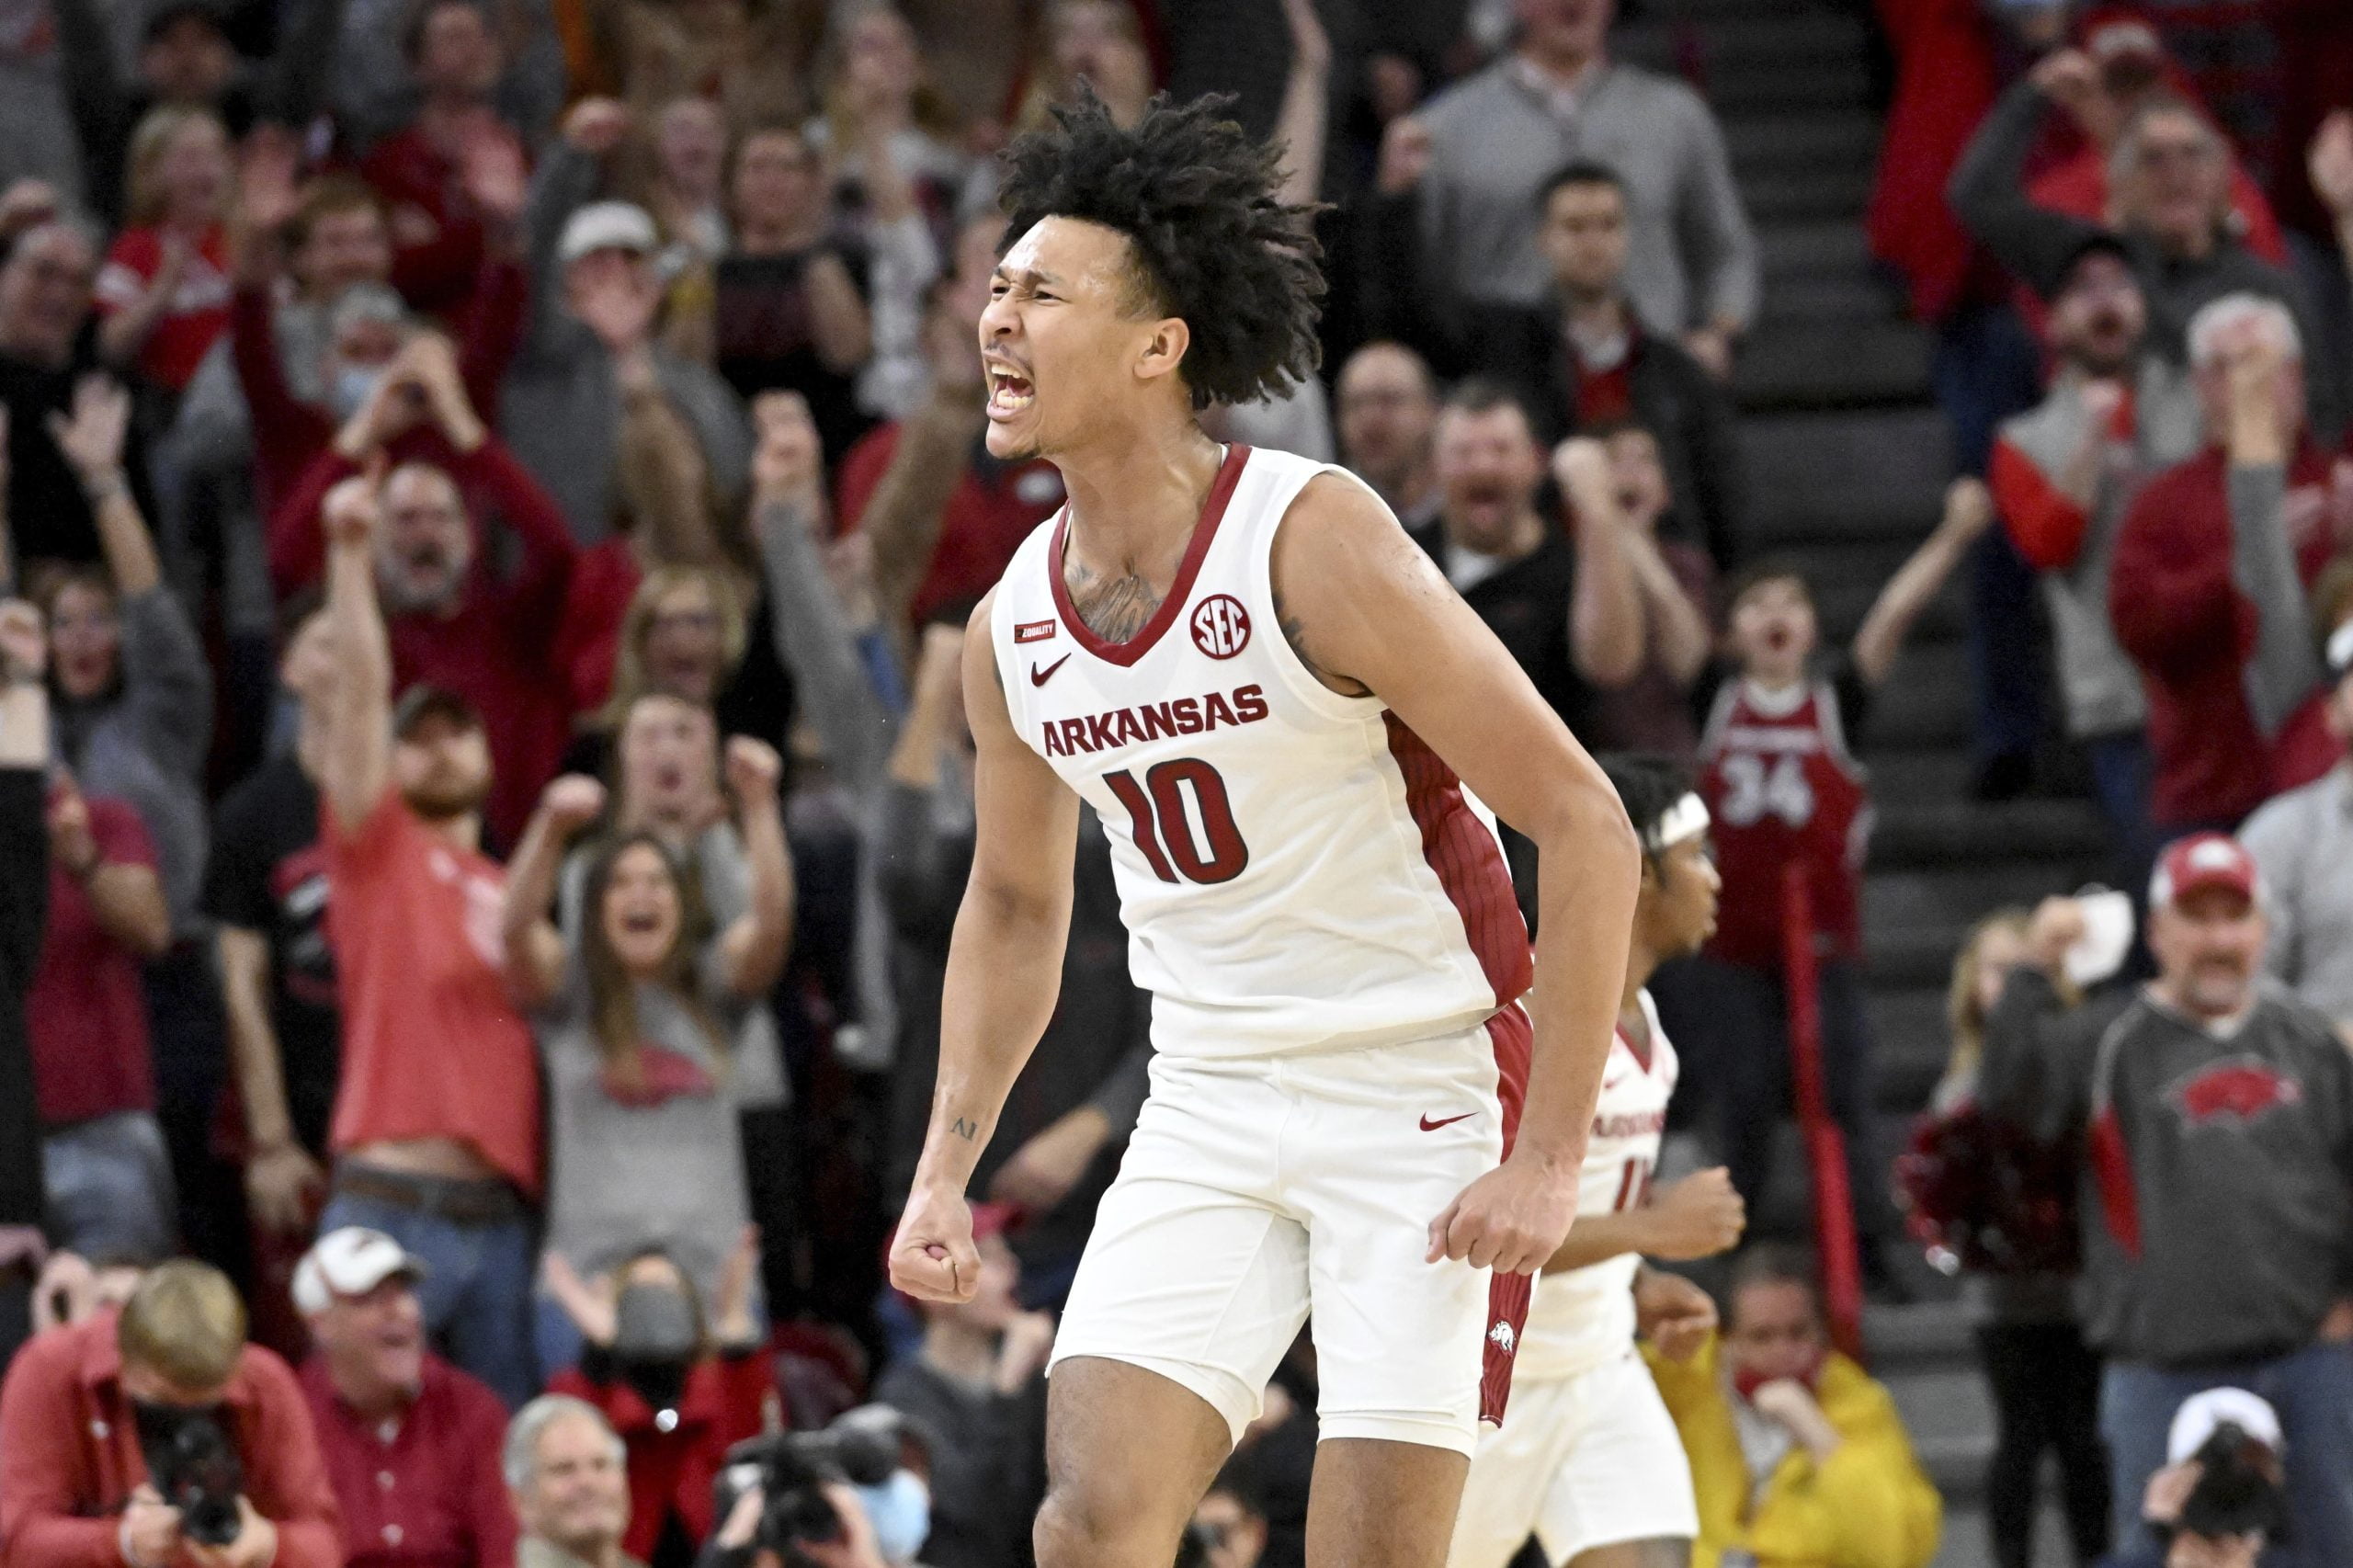 Arkansas holds off Texas A&M’s late rally, wins 76-73 in OT 2